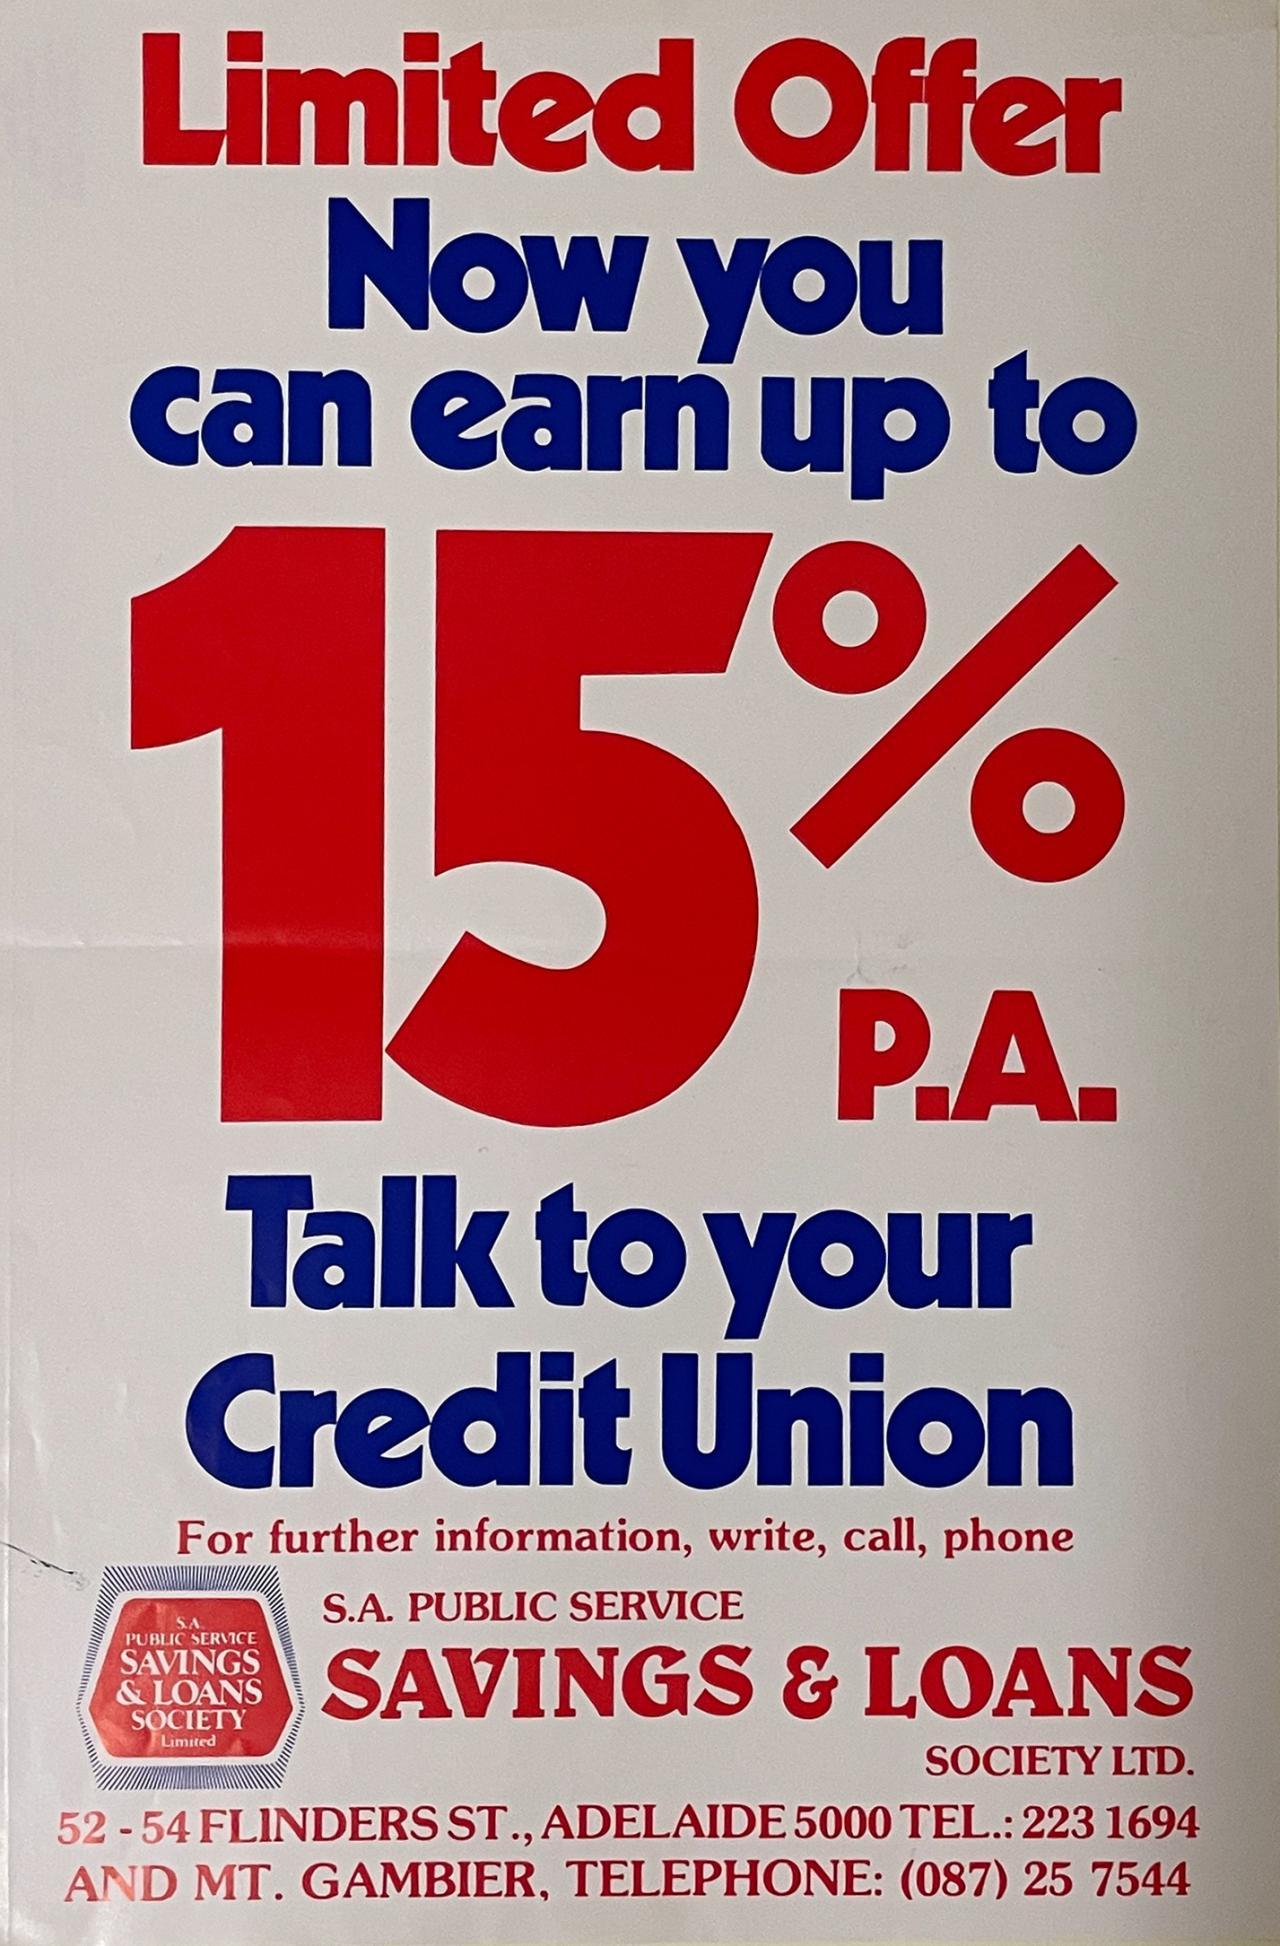 Limited offer. How you can earn up to 15%p.a. Poster, 1983.